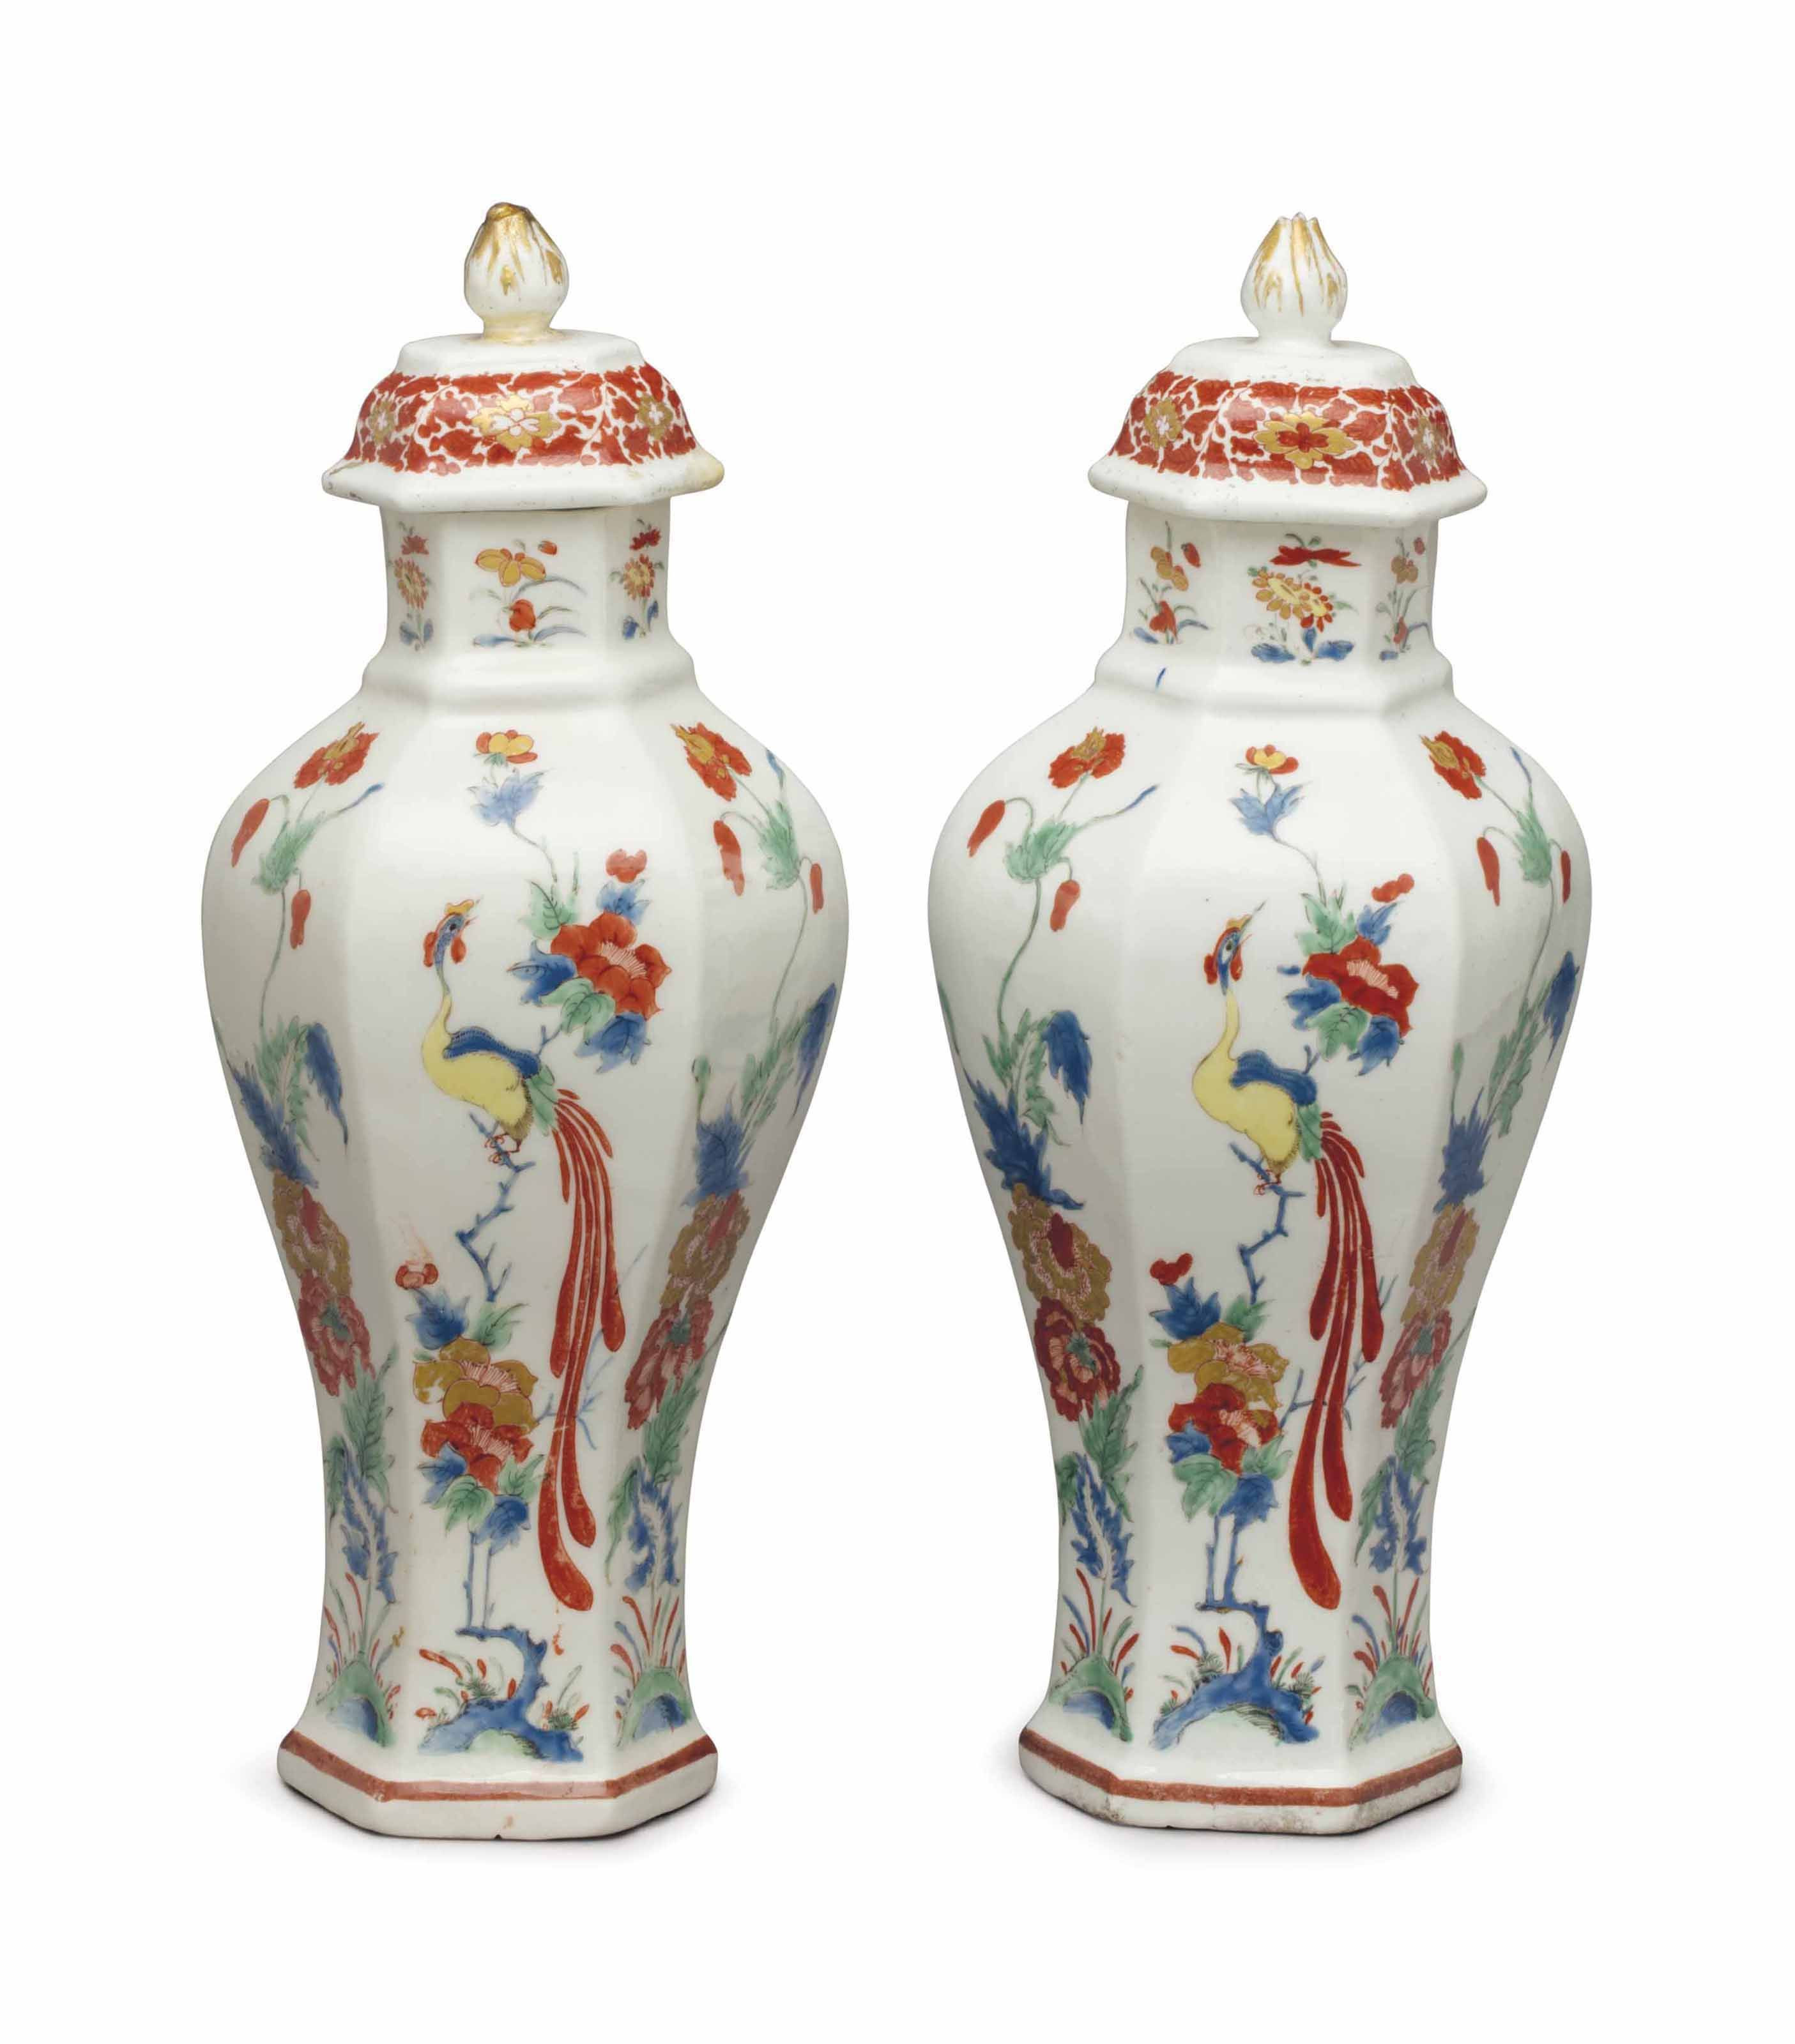 20 Popular Big Chinese Vases for Sale 2022 free download big chinese vases for sale of a pair of bow porcelain kakiemon hexagonal vases and two covers with a pair of bow porcelain kakiemon hexagonal vases and two covers the vases circa 1755